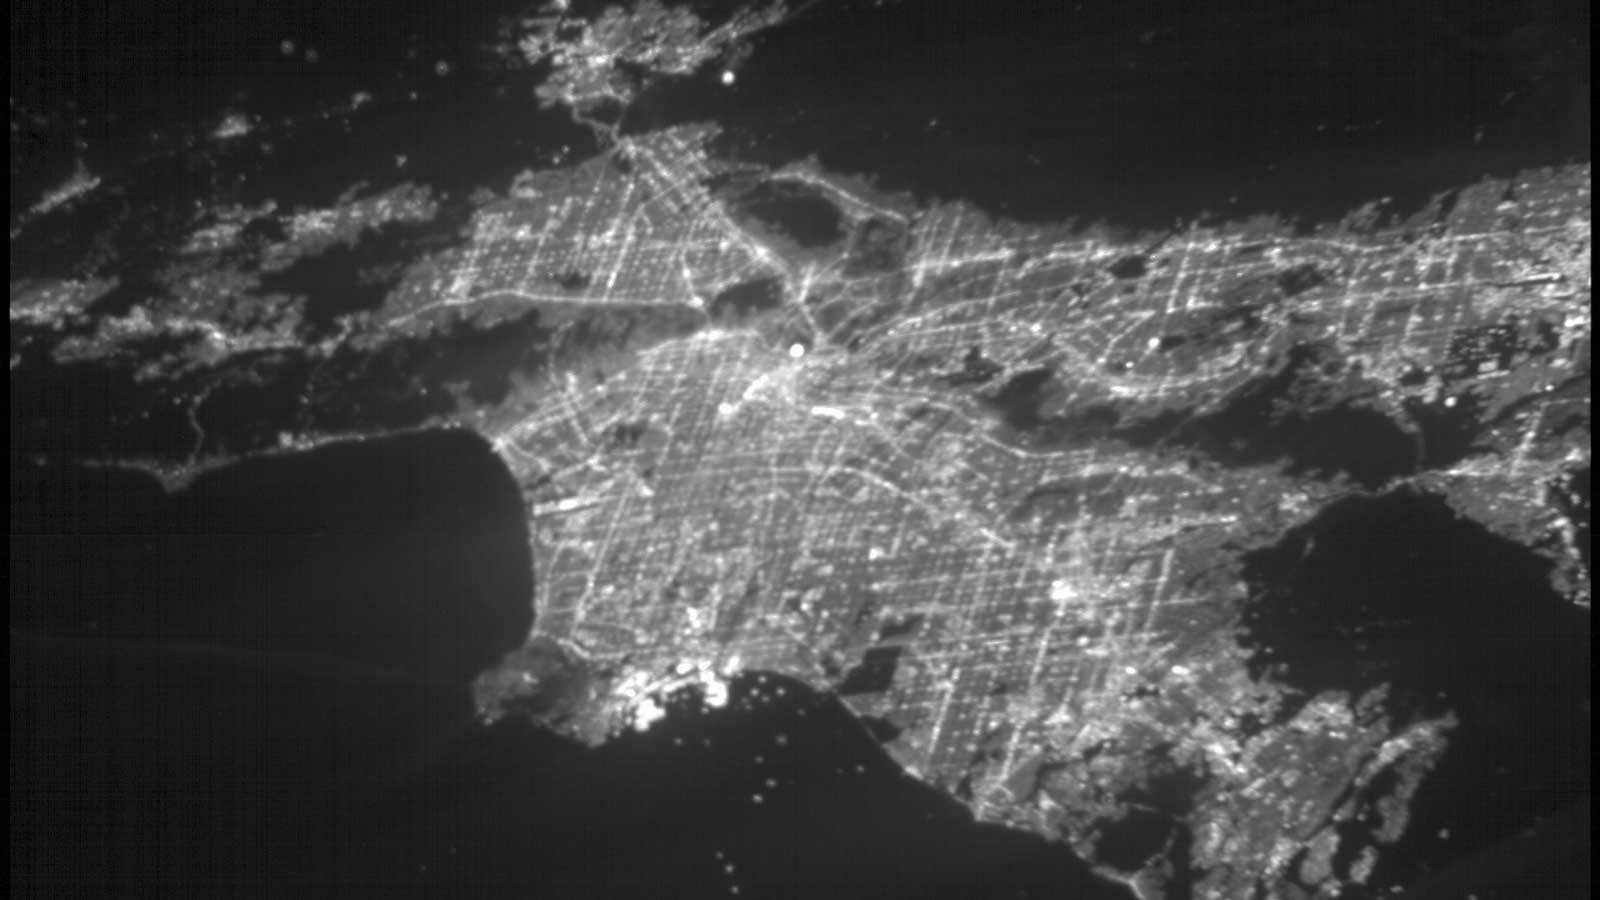 This image of the greater Los Angeles area was taken on March 29, 2019 by ASTERIA, the Arcsecond Space Telescope Enabling Research in Astrophysics satellite. The Port of Long Beach is visible near the center of the image.